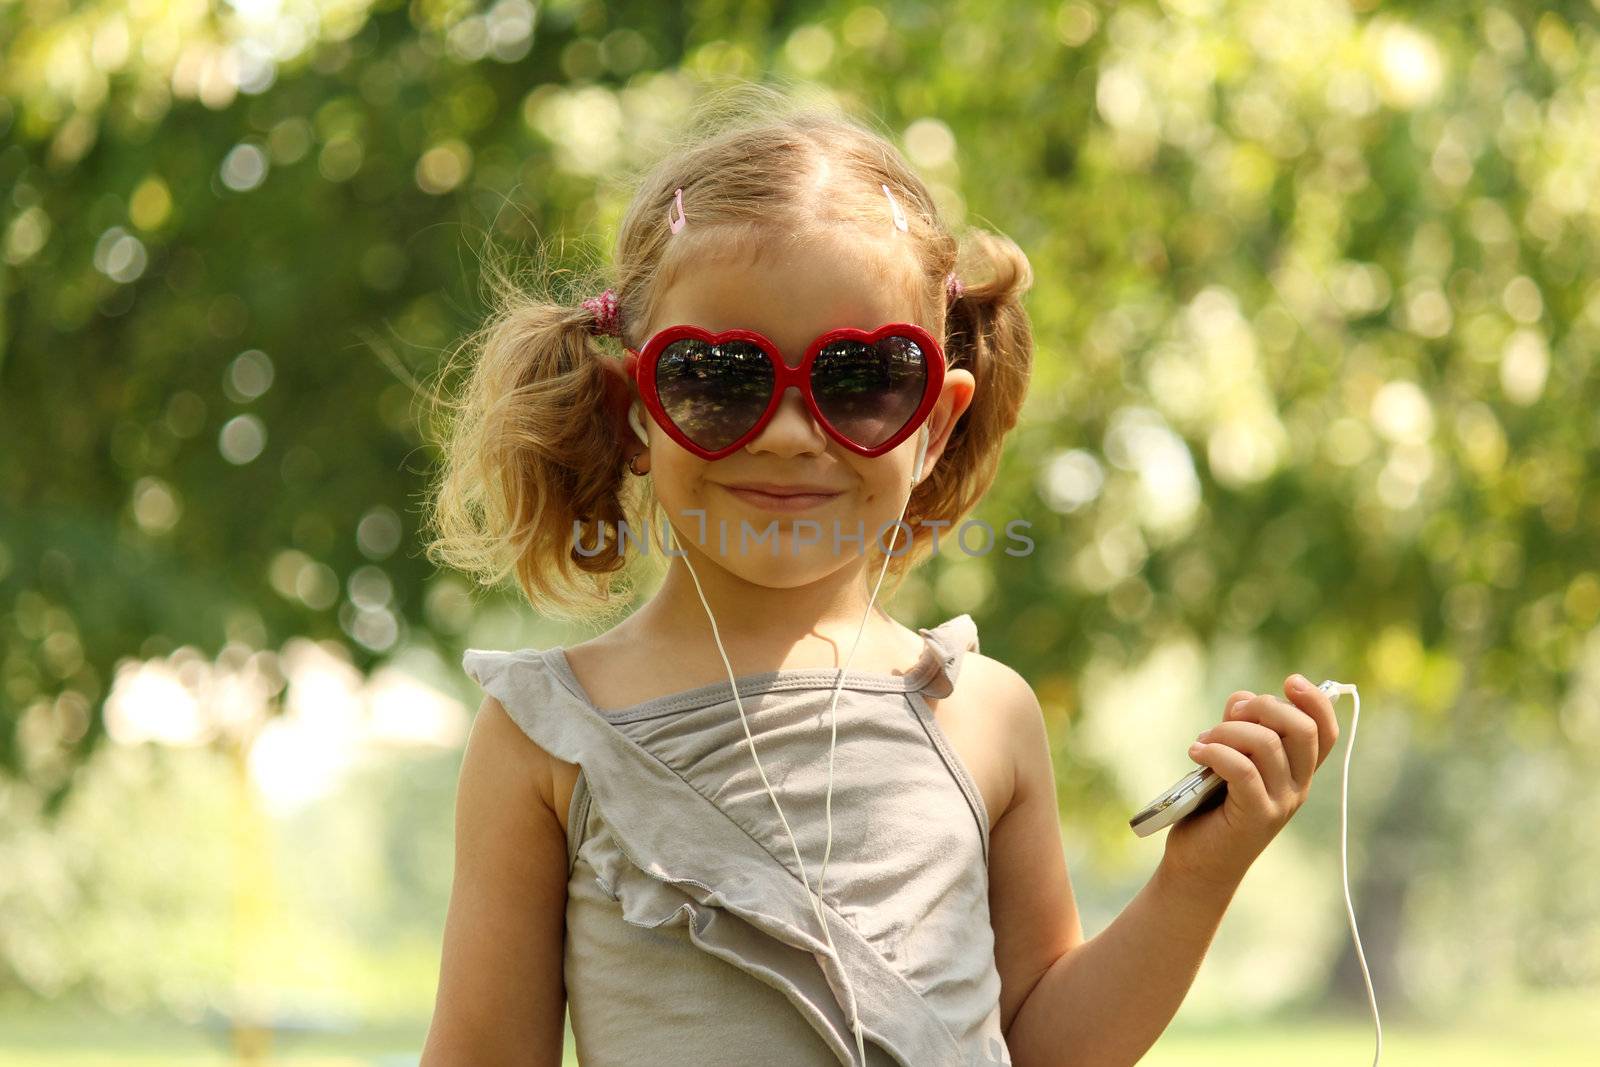 little girl with sunglasses listening music by goce